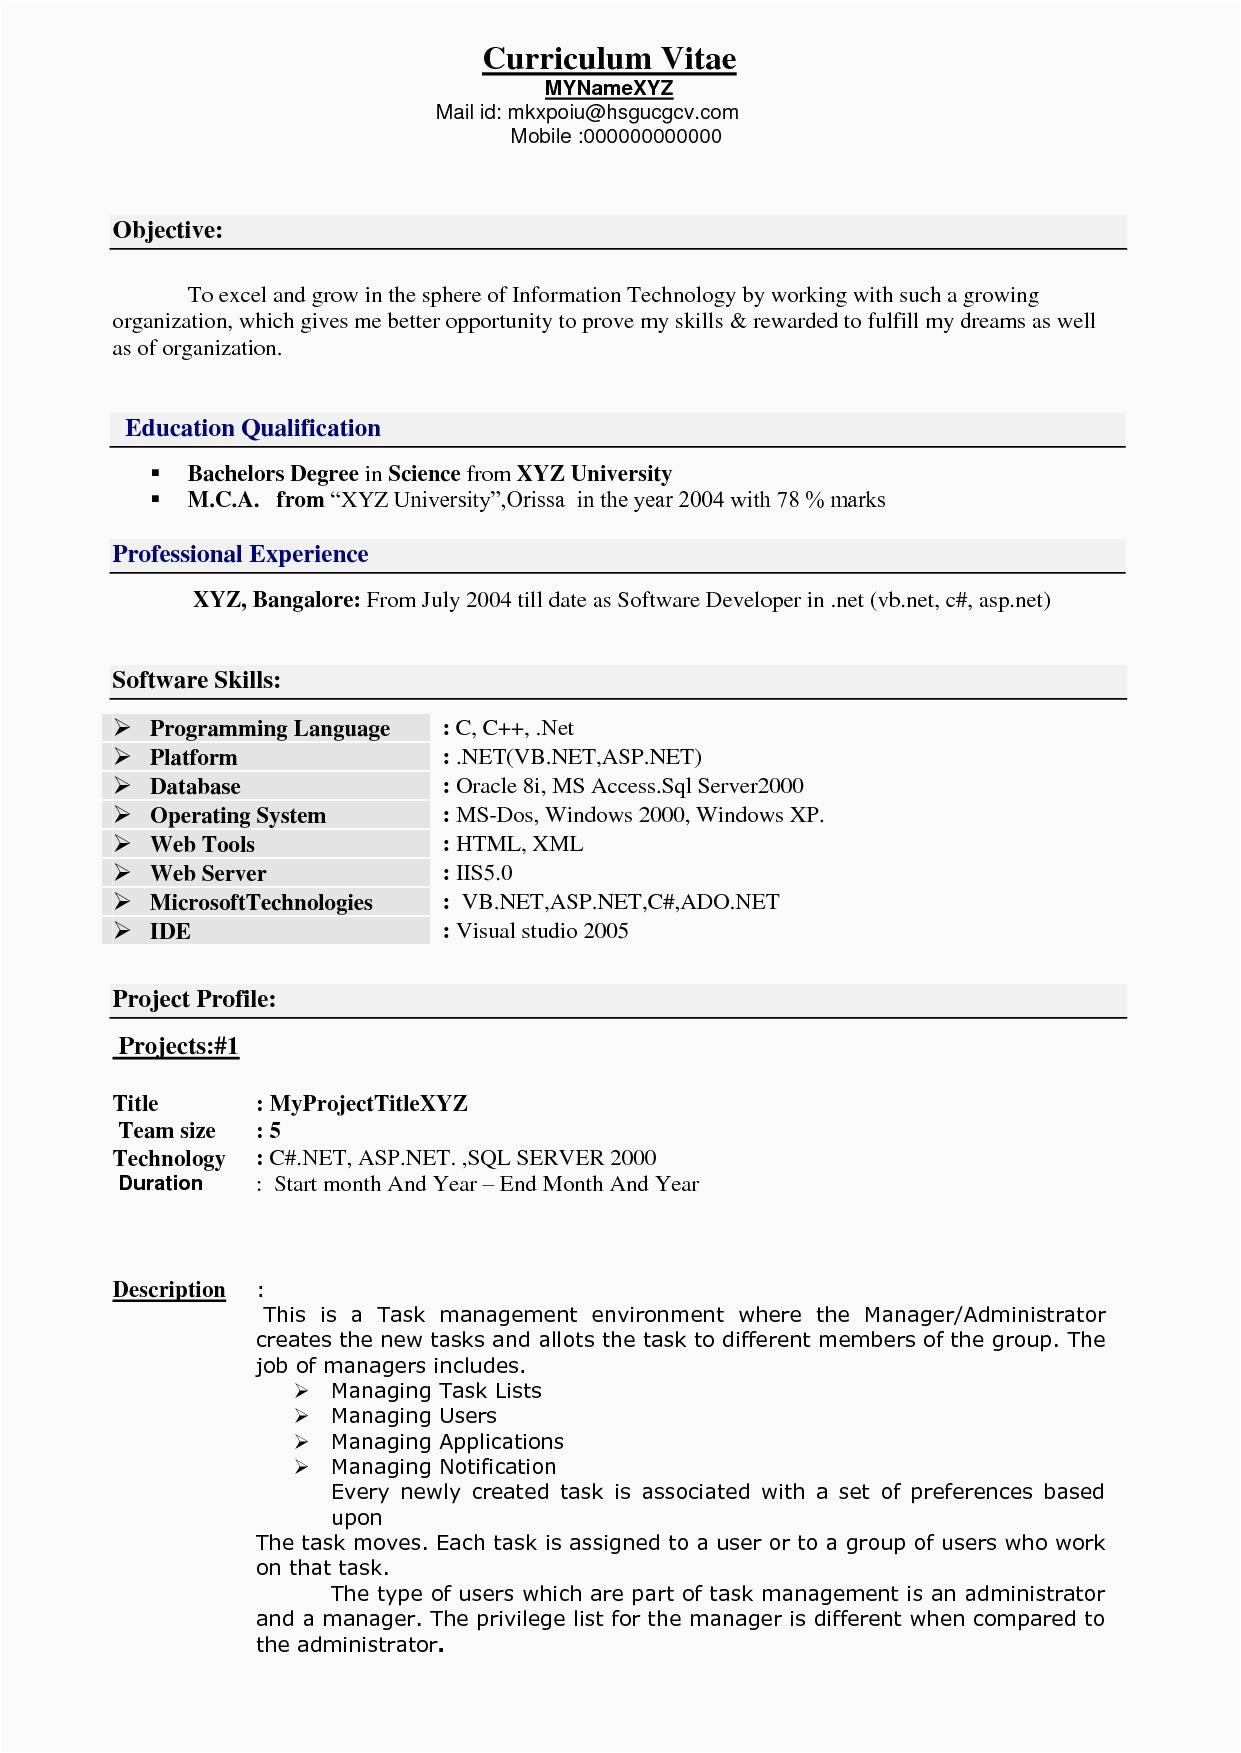 Sample Resume for One Year Experienced software Engineer Resume format 1 Year Experienced software Engineer